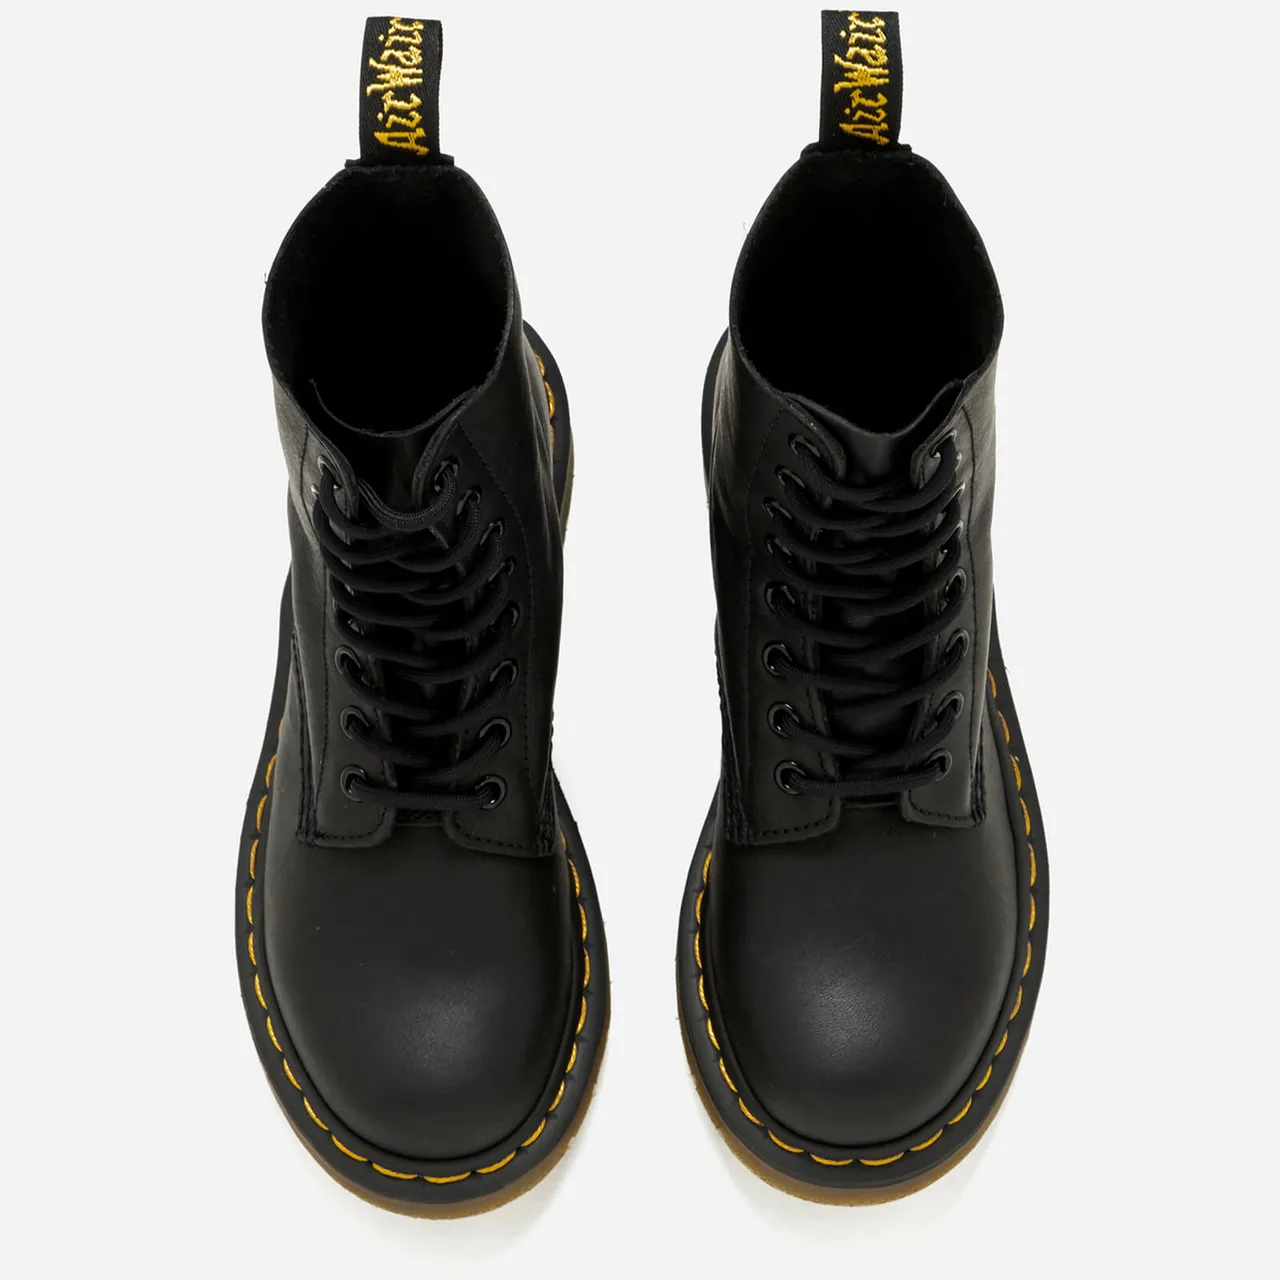 Dr. Martens Women's 1460 Pascal Virginia Leather